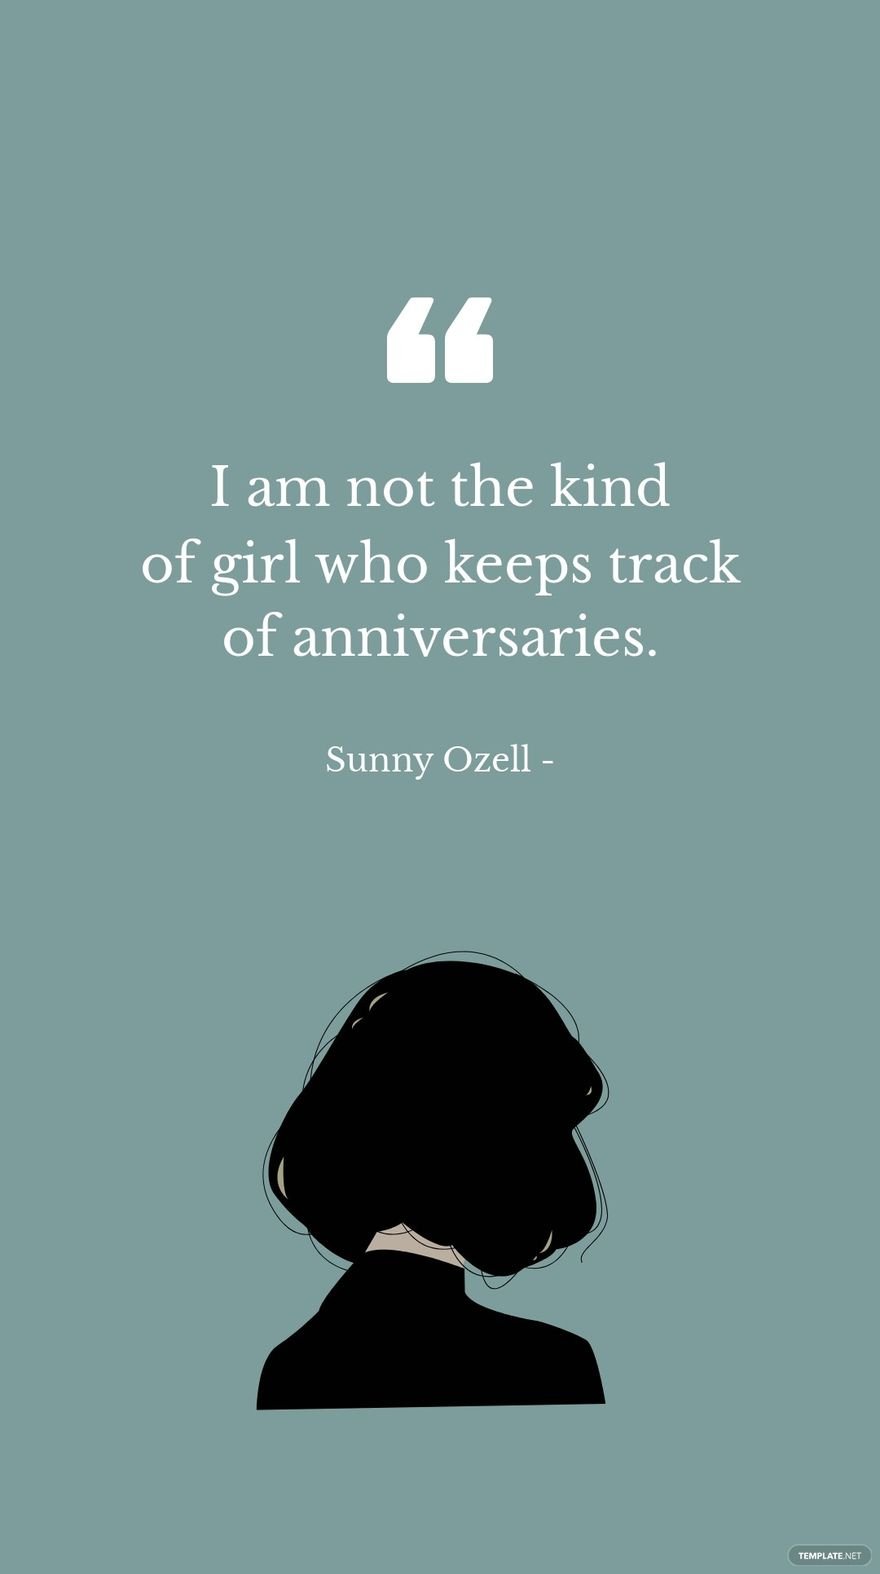 Sunny Ozell - I am not the kind of girl who keeps track of anniversaries.